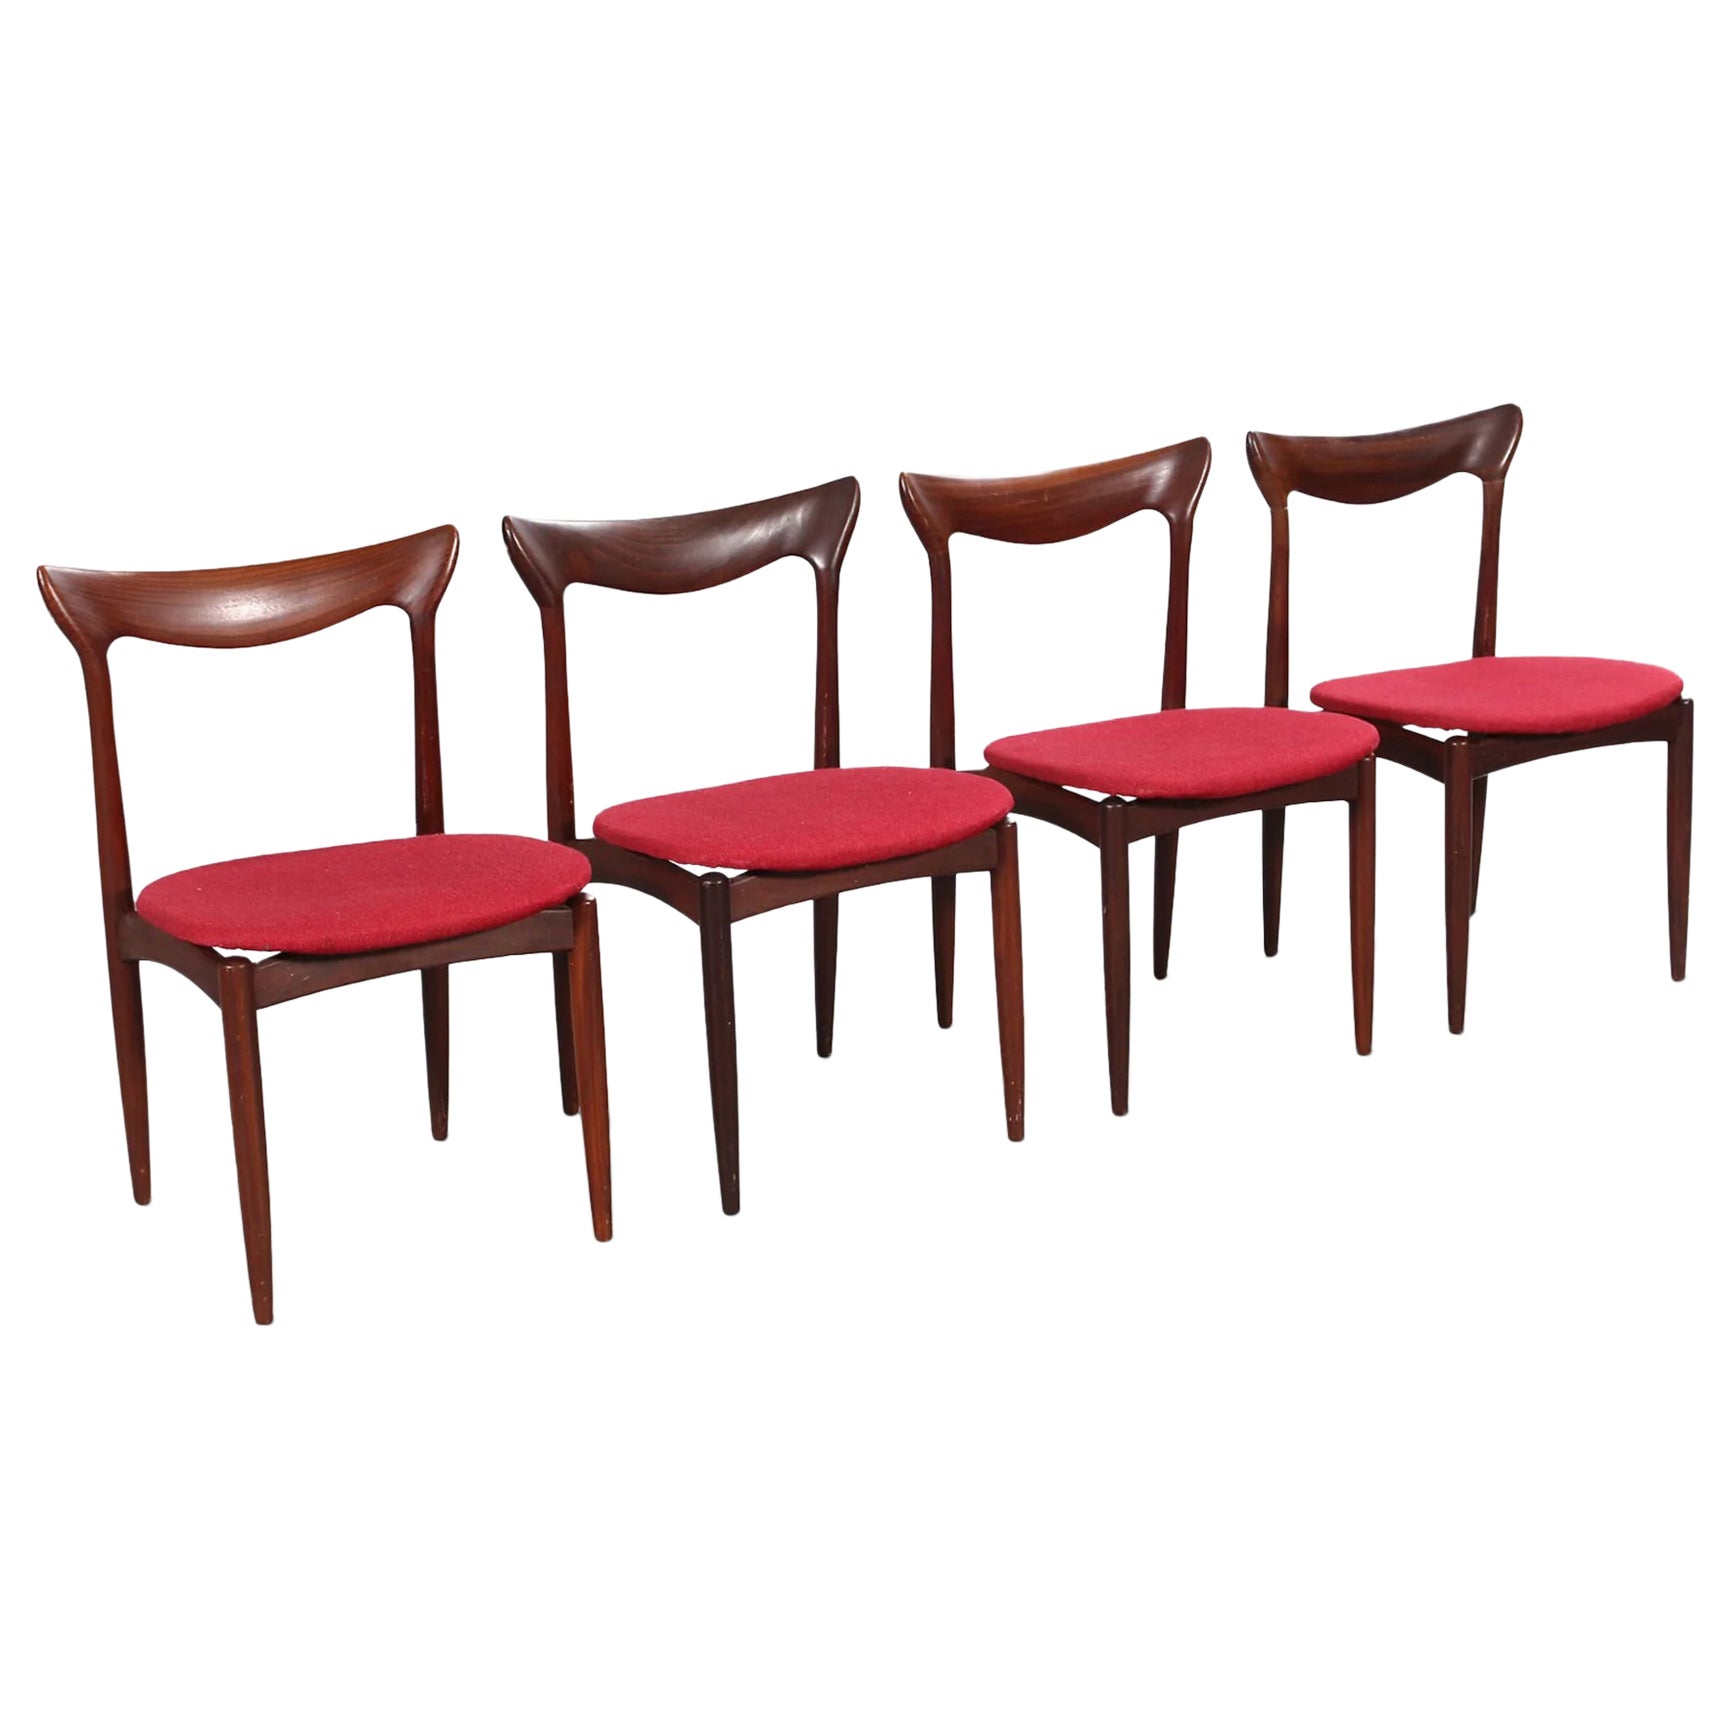 Set of four organic dining chairs in afromosia by h.W. Klein